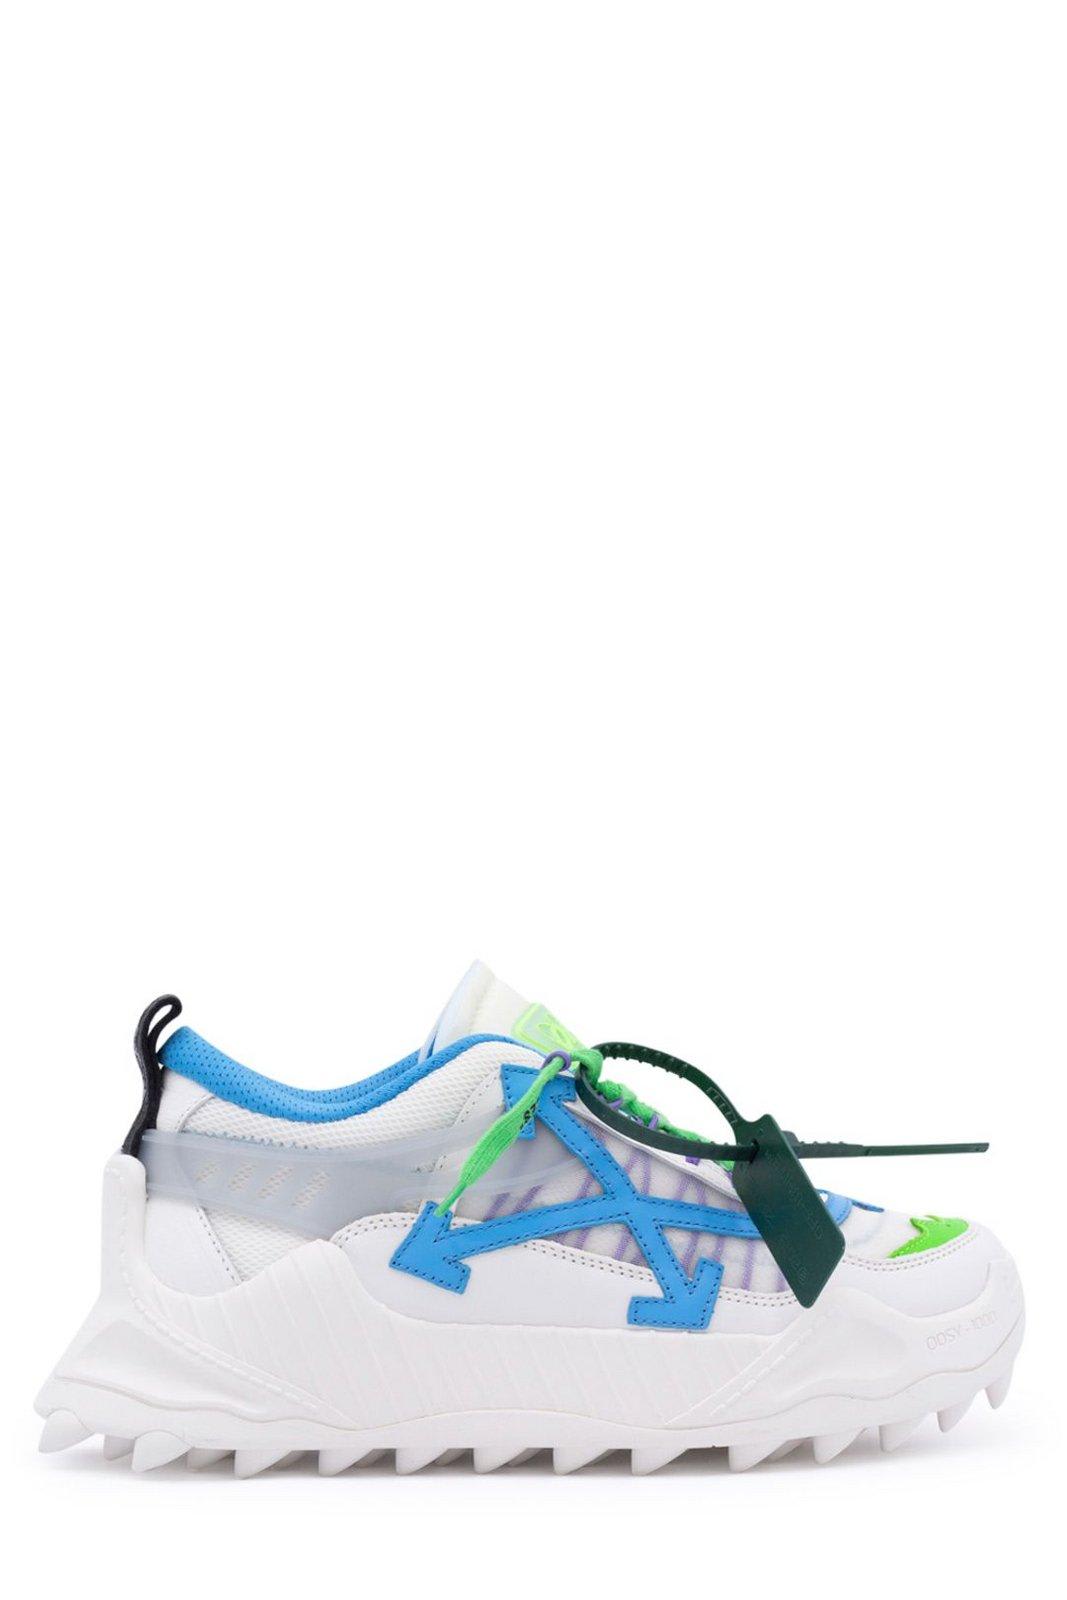 Off-White Odsy 1000 Lace-up Sneakers